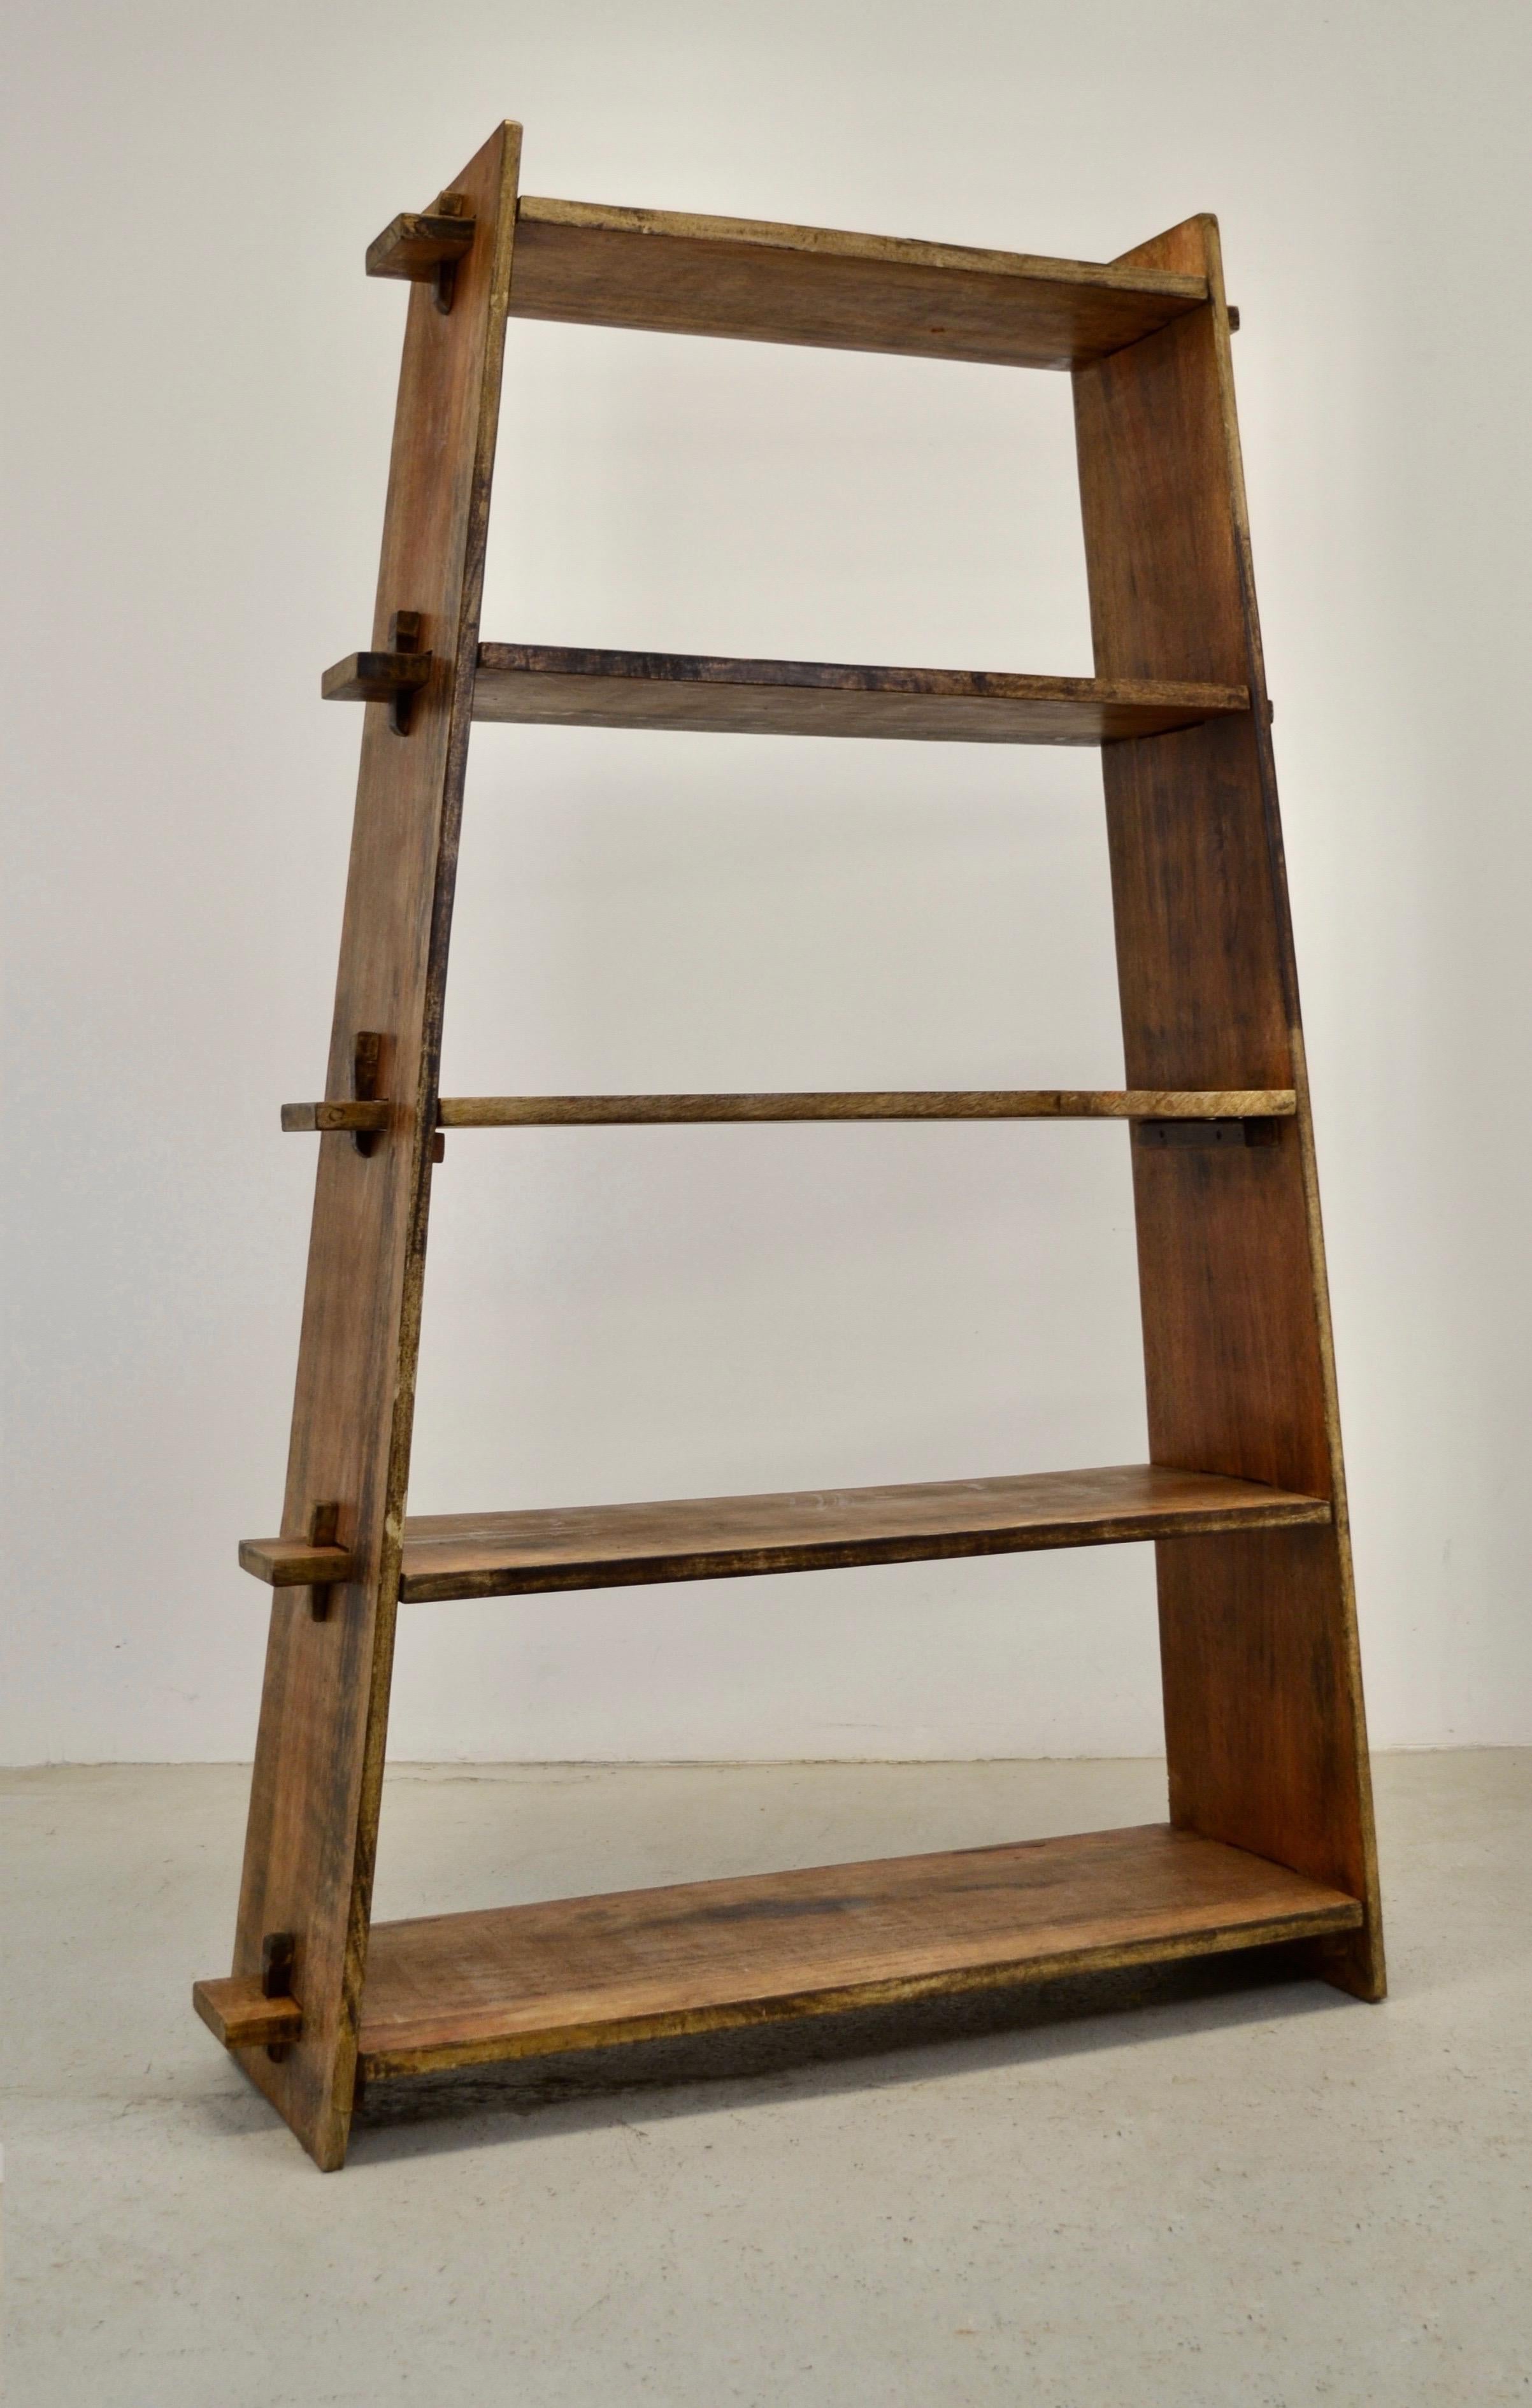 A rustic alpine shelf, representative of 20th-century French folk art, features two sturdy uprights and five solid wooden shelves intricately joined together with wooden pegs. The ingenious design allows for effortless disassembly, making